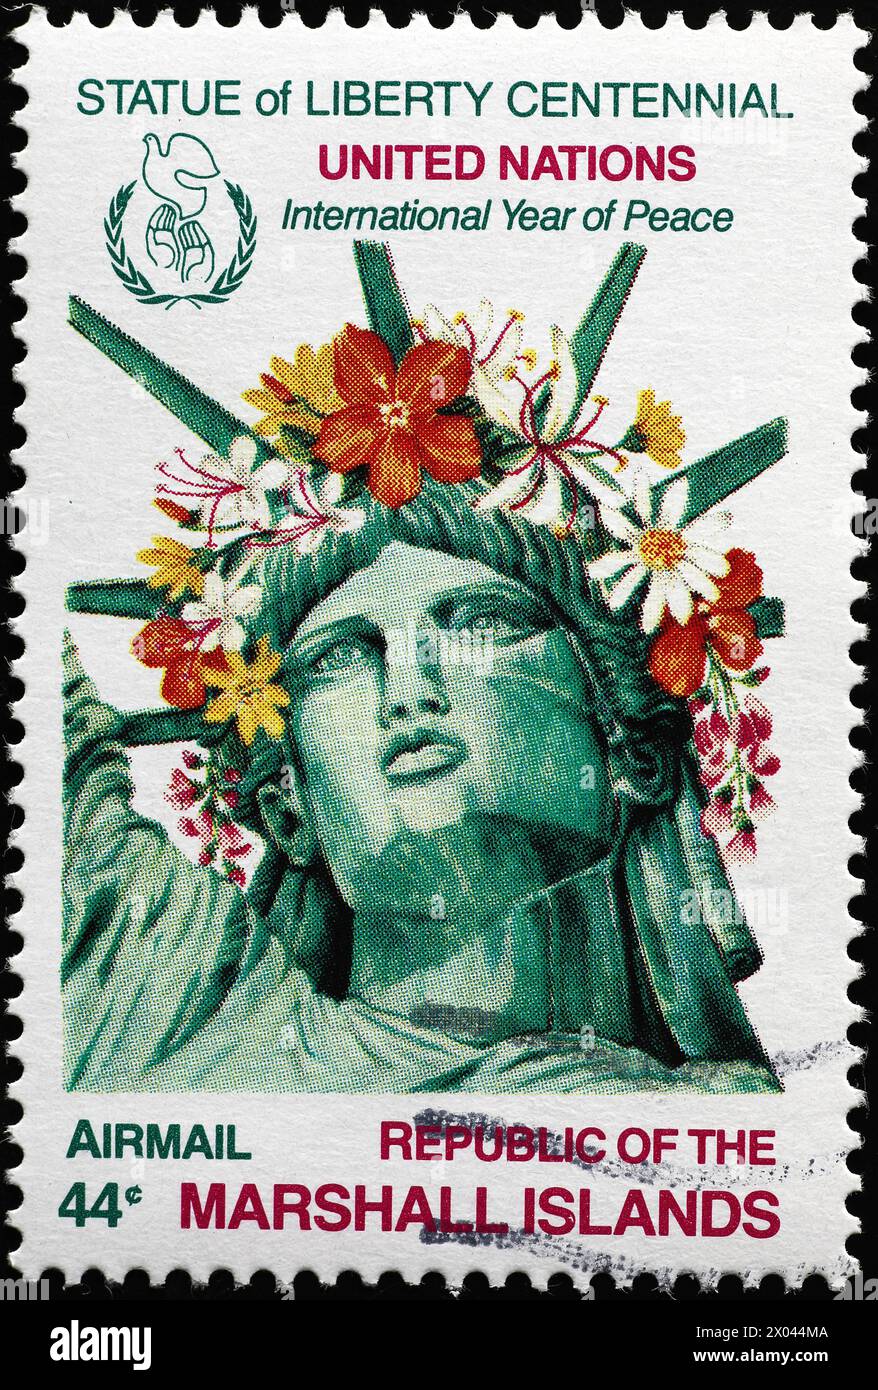 International year of peace celebrated on postage stamp. Stock Photo